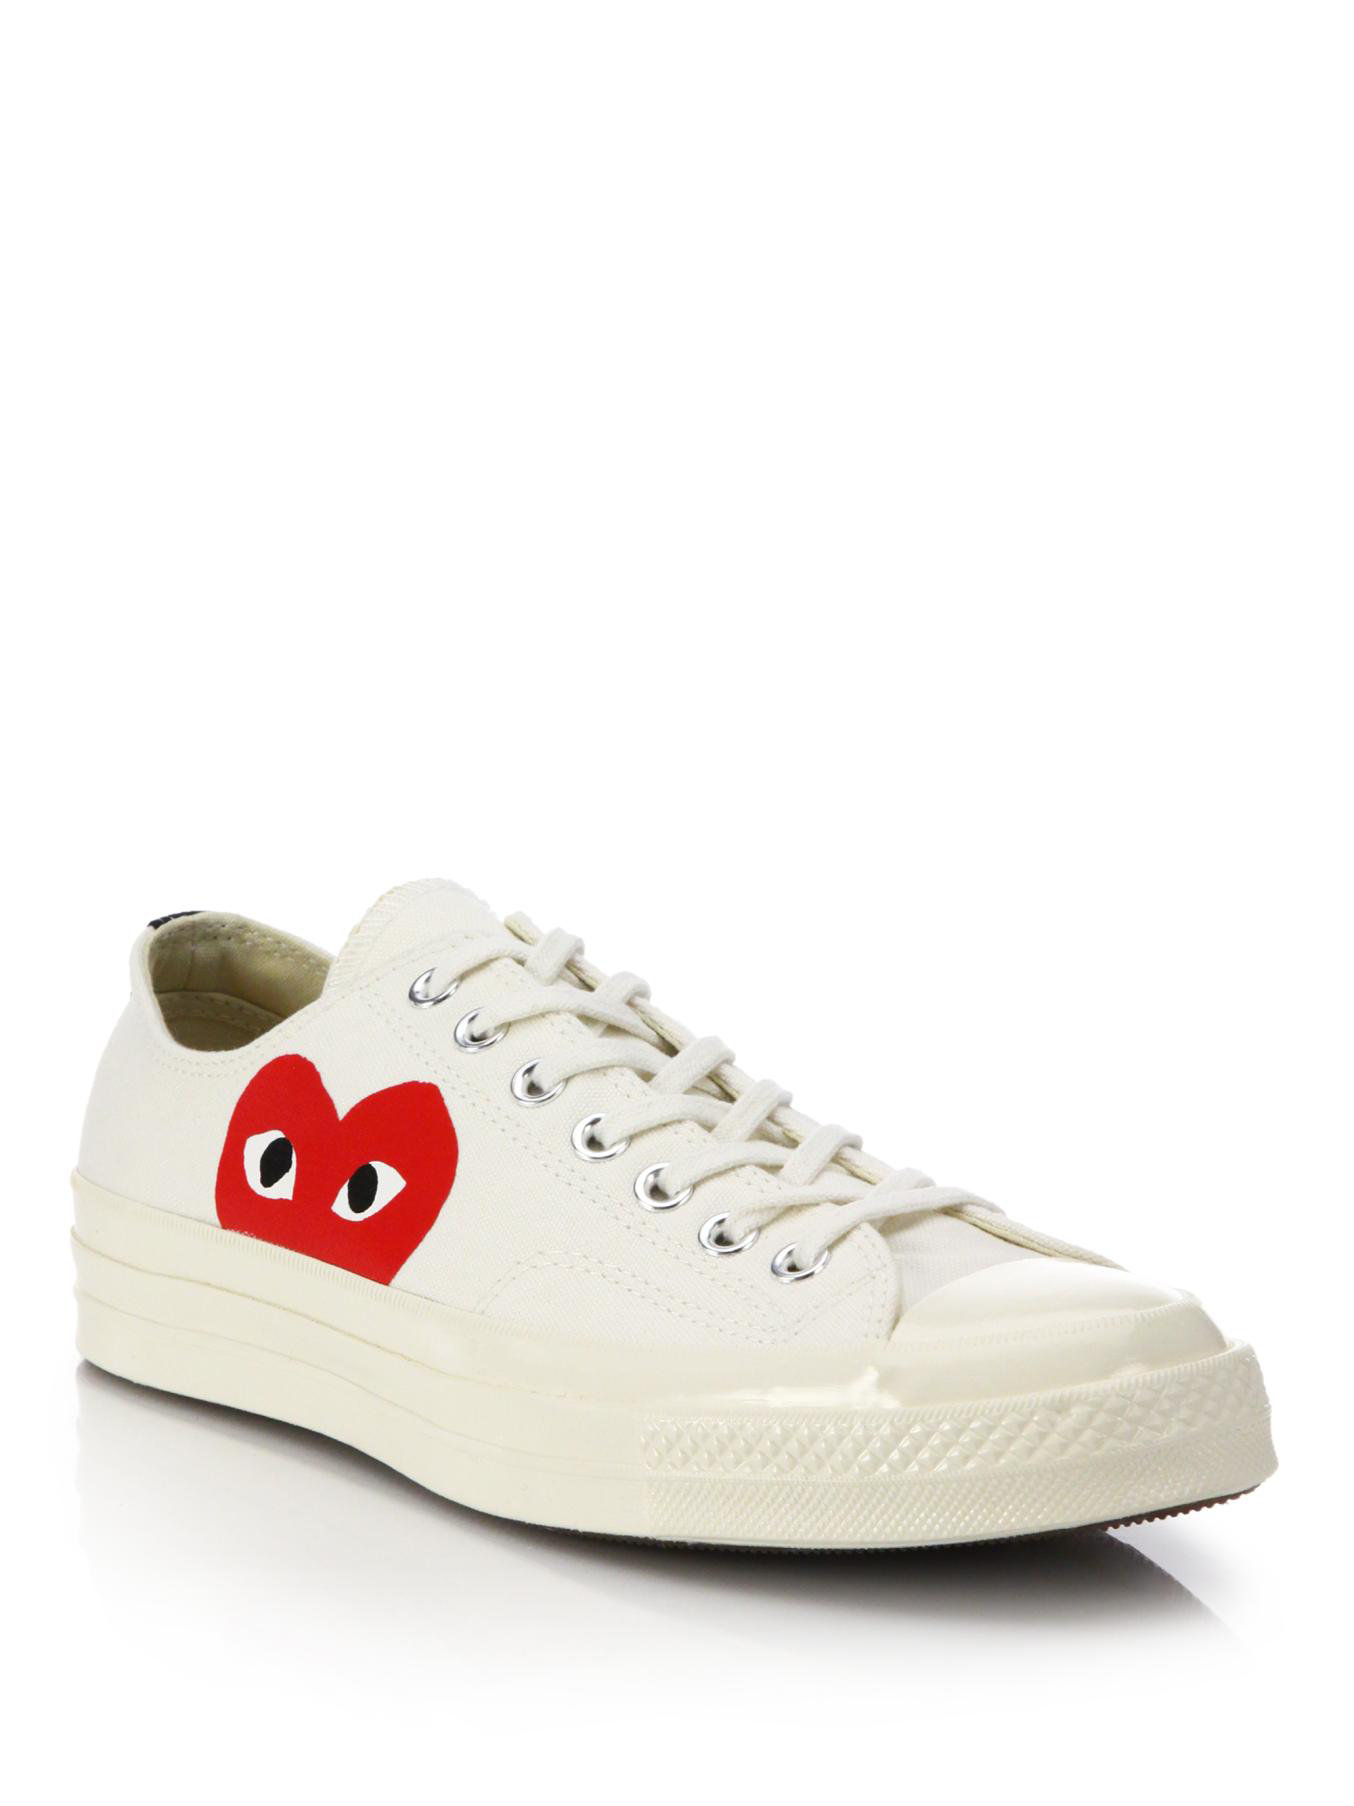 Play comme des garçons Peek-a-boo Canvas Low-top Sneakers in White ...